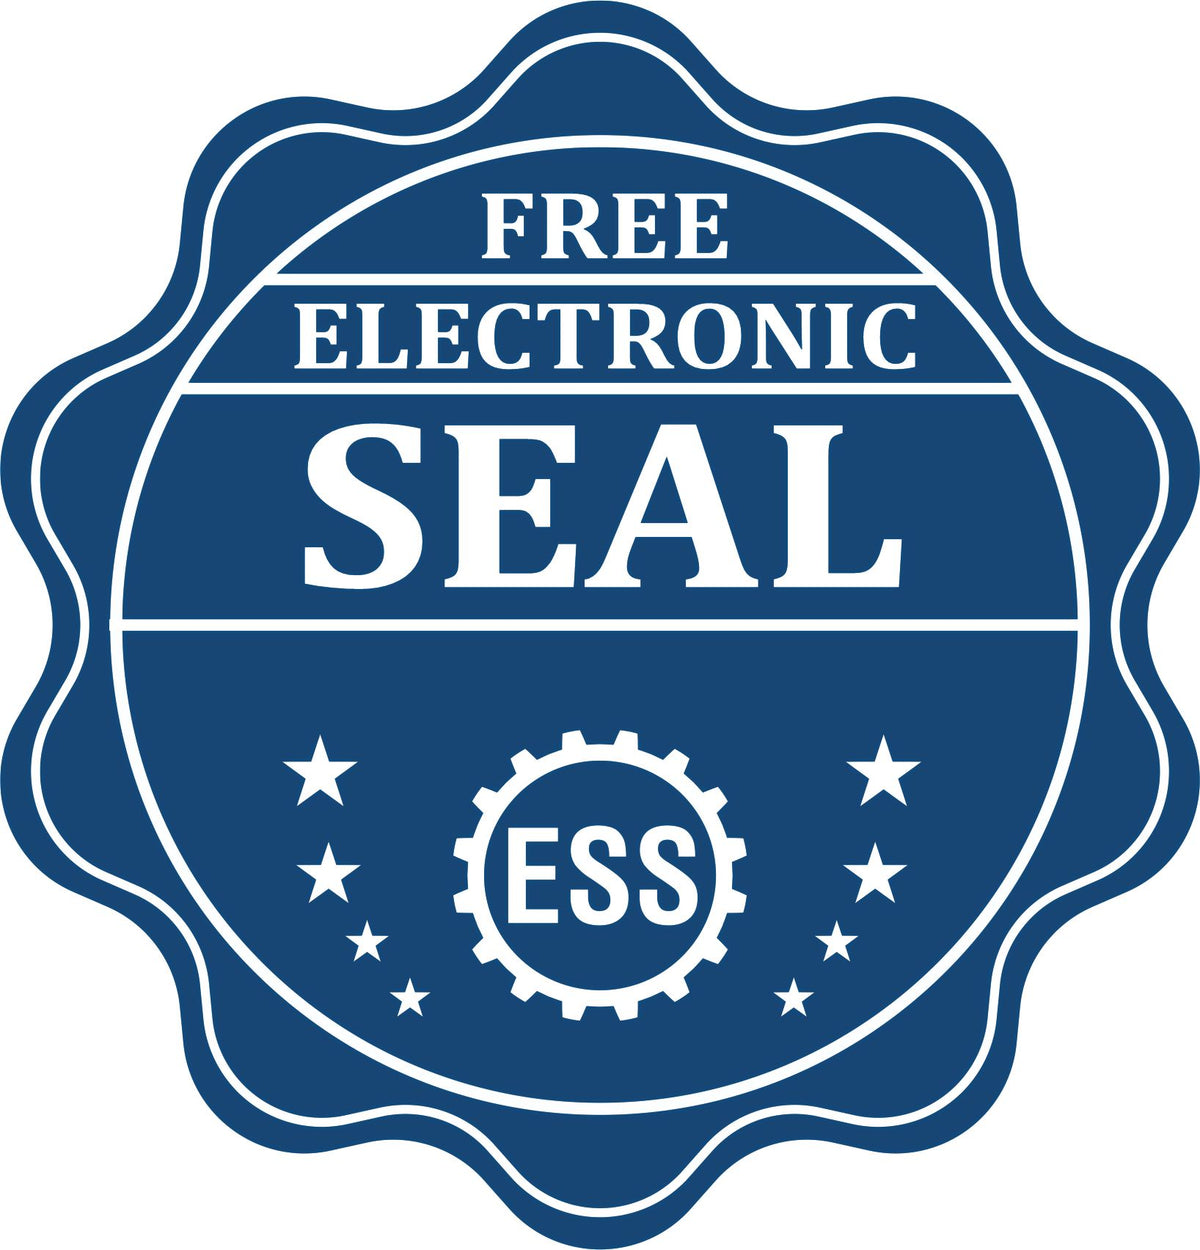 A badge showing a free electronic seal for the Hybrid South Carolina Land Surveyor Seal with stars and the ESS gear on the emblem.